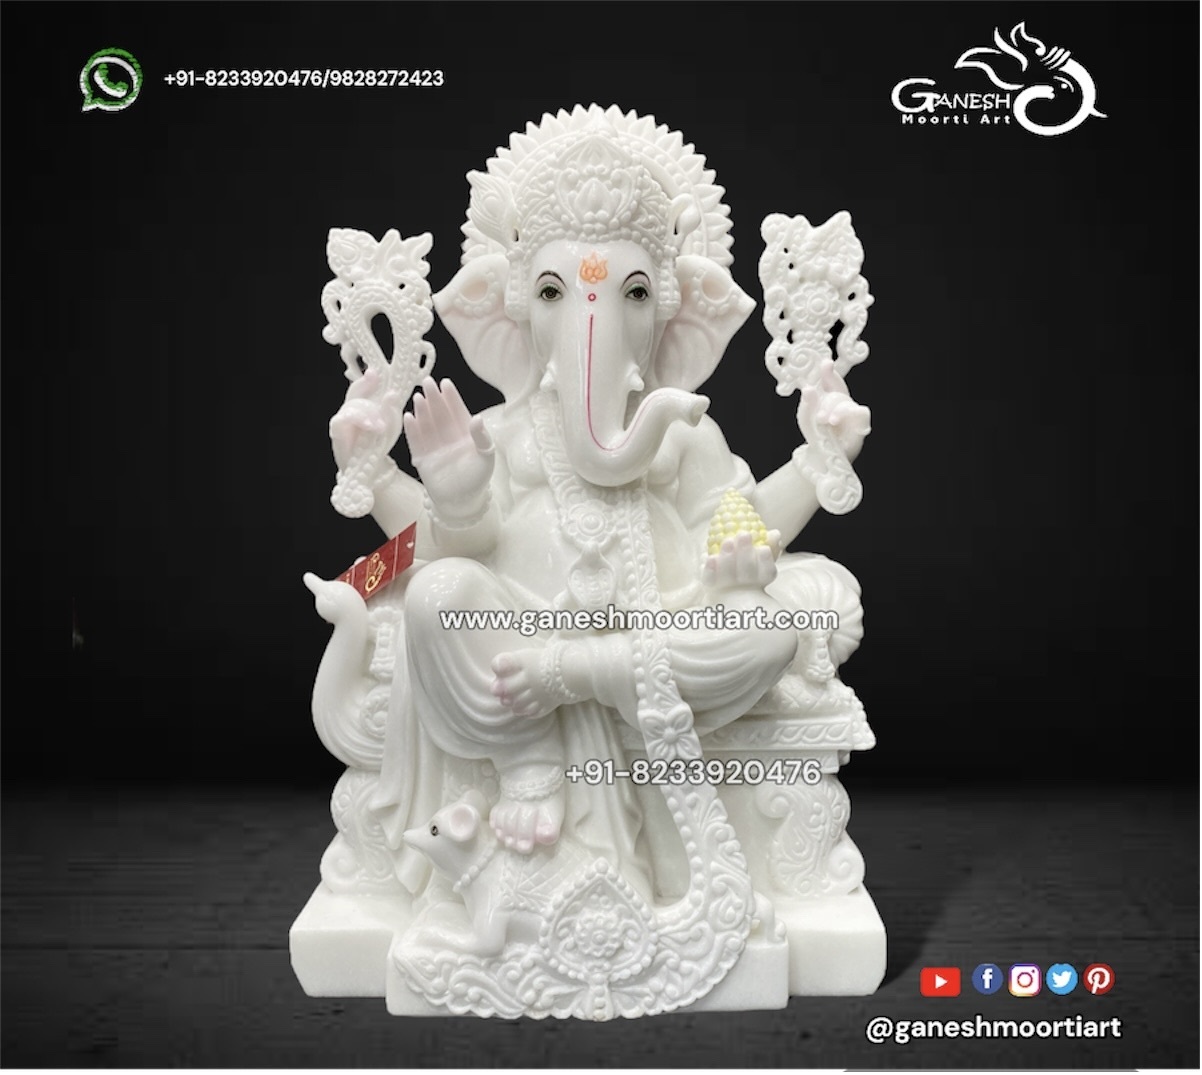 Special Ganesh Statue for home